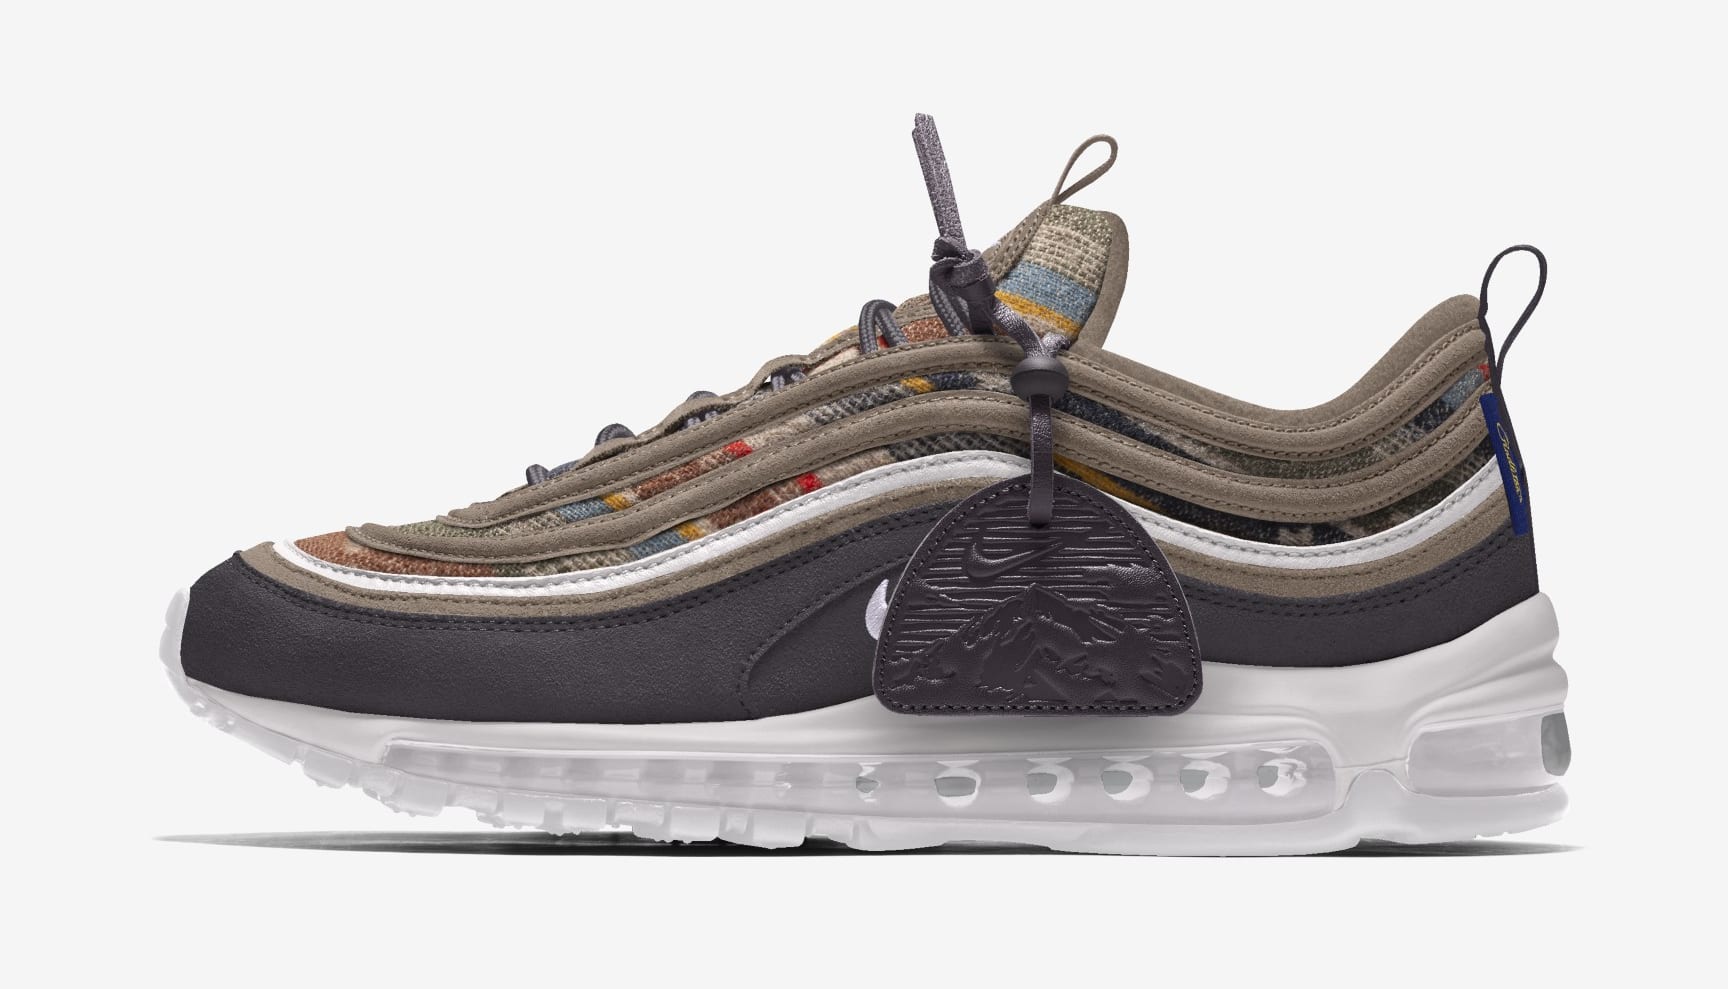 Nike Pendleton Air Max 97 By You Lateral